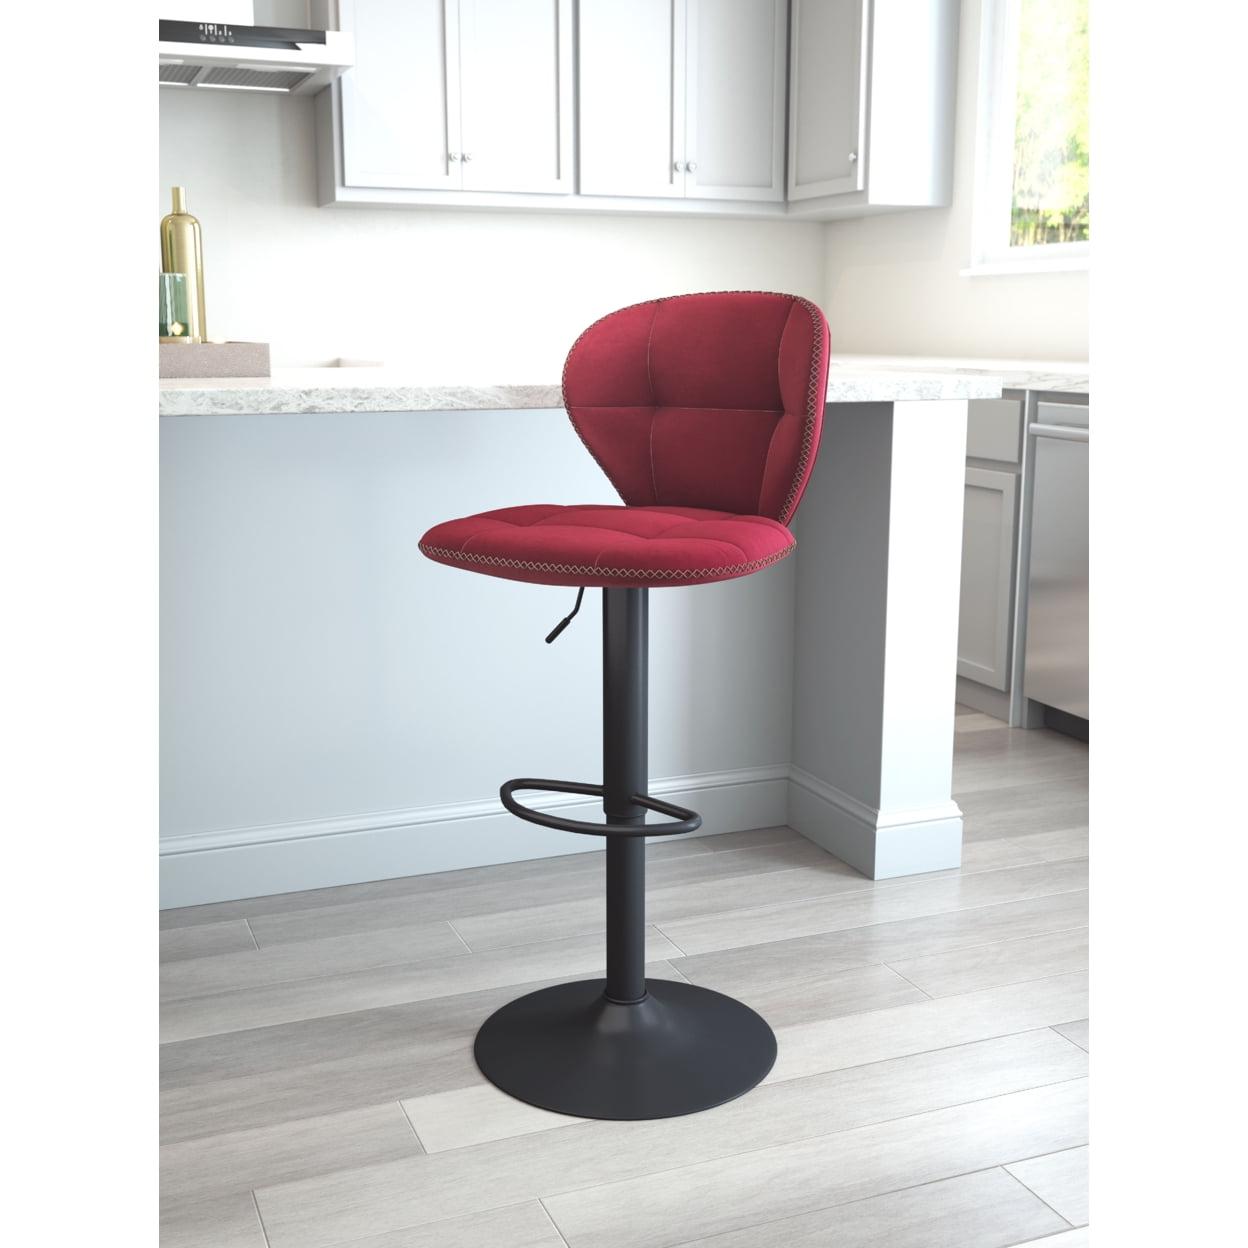 Adjustable Contemporary Red Wood and Metal Bar Stool